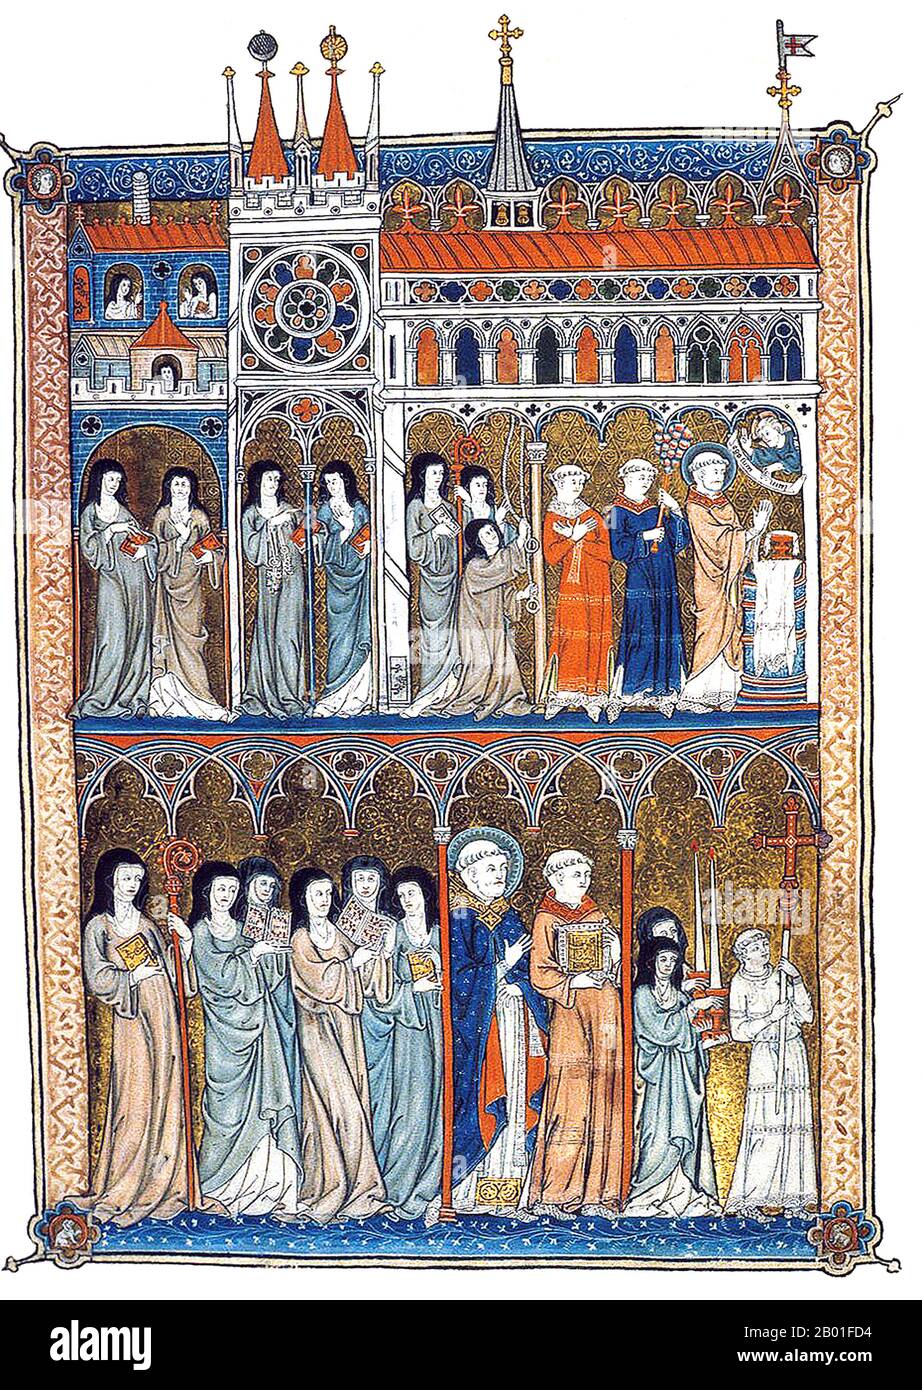 France: Illuminated manuscript showing Cistercian nuns worshipping, c. 1290.  The Order of Cistercians (Latin: Ordo Cisterciensis or, alternatively, O.C.S.O. for the Trappists [Order of Cistercians of the Strict Observance]) is a Catholic religious order of enclosed monks and nuns. They are sometimes also called the Bernardines or the White Monks, in reference to the colour of the habit, over which a black scapular is worn.  The emphasis of Cistercian life is on manual labour and self-sufficiency, and many abbeys have traditionally supported themselves through activities such as agriculture. Stock Photo